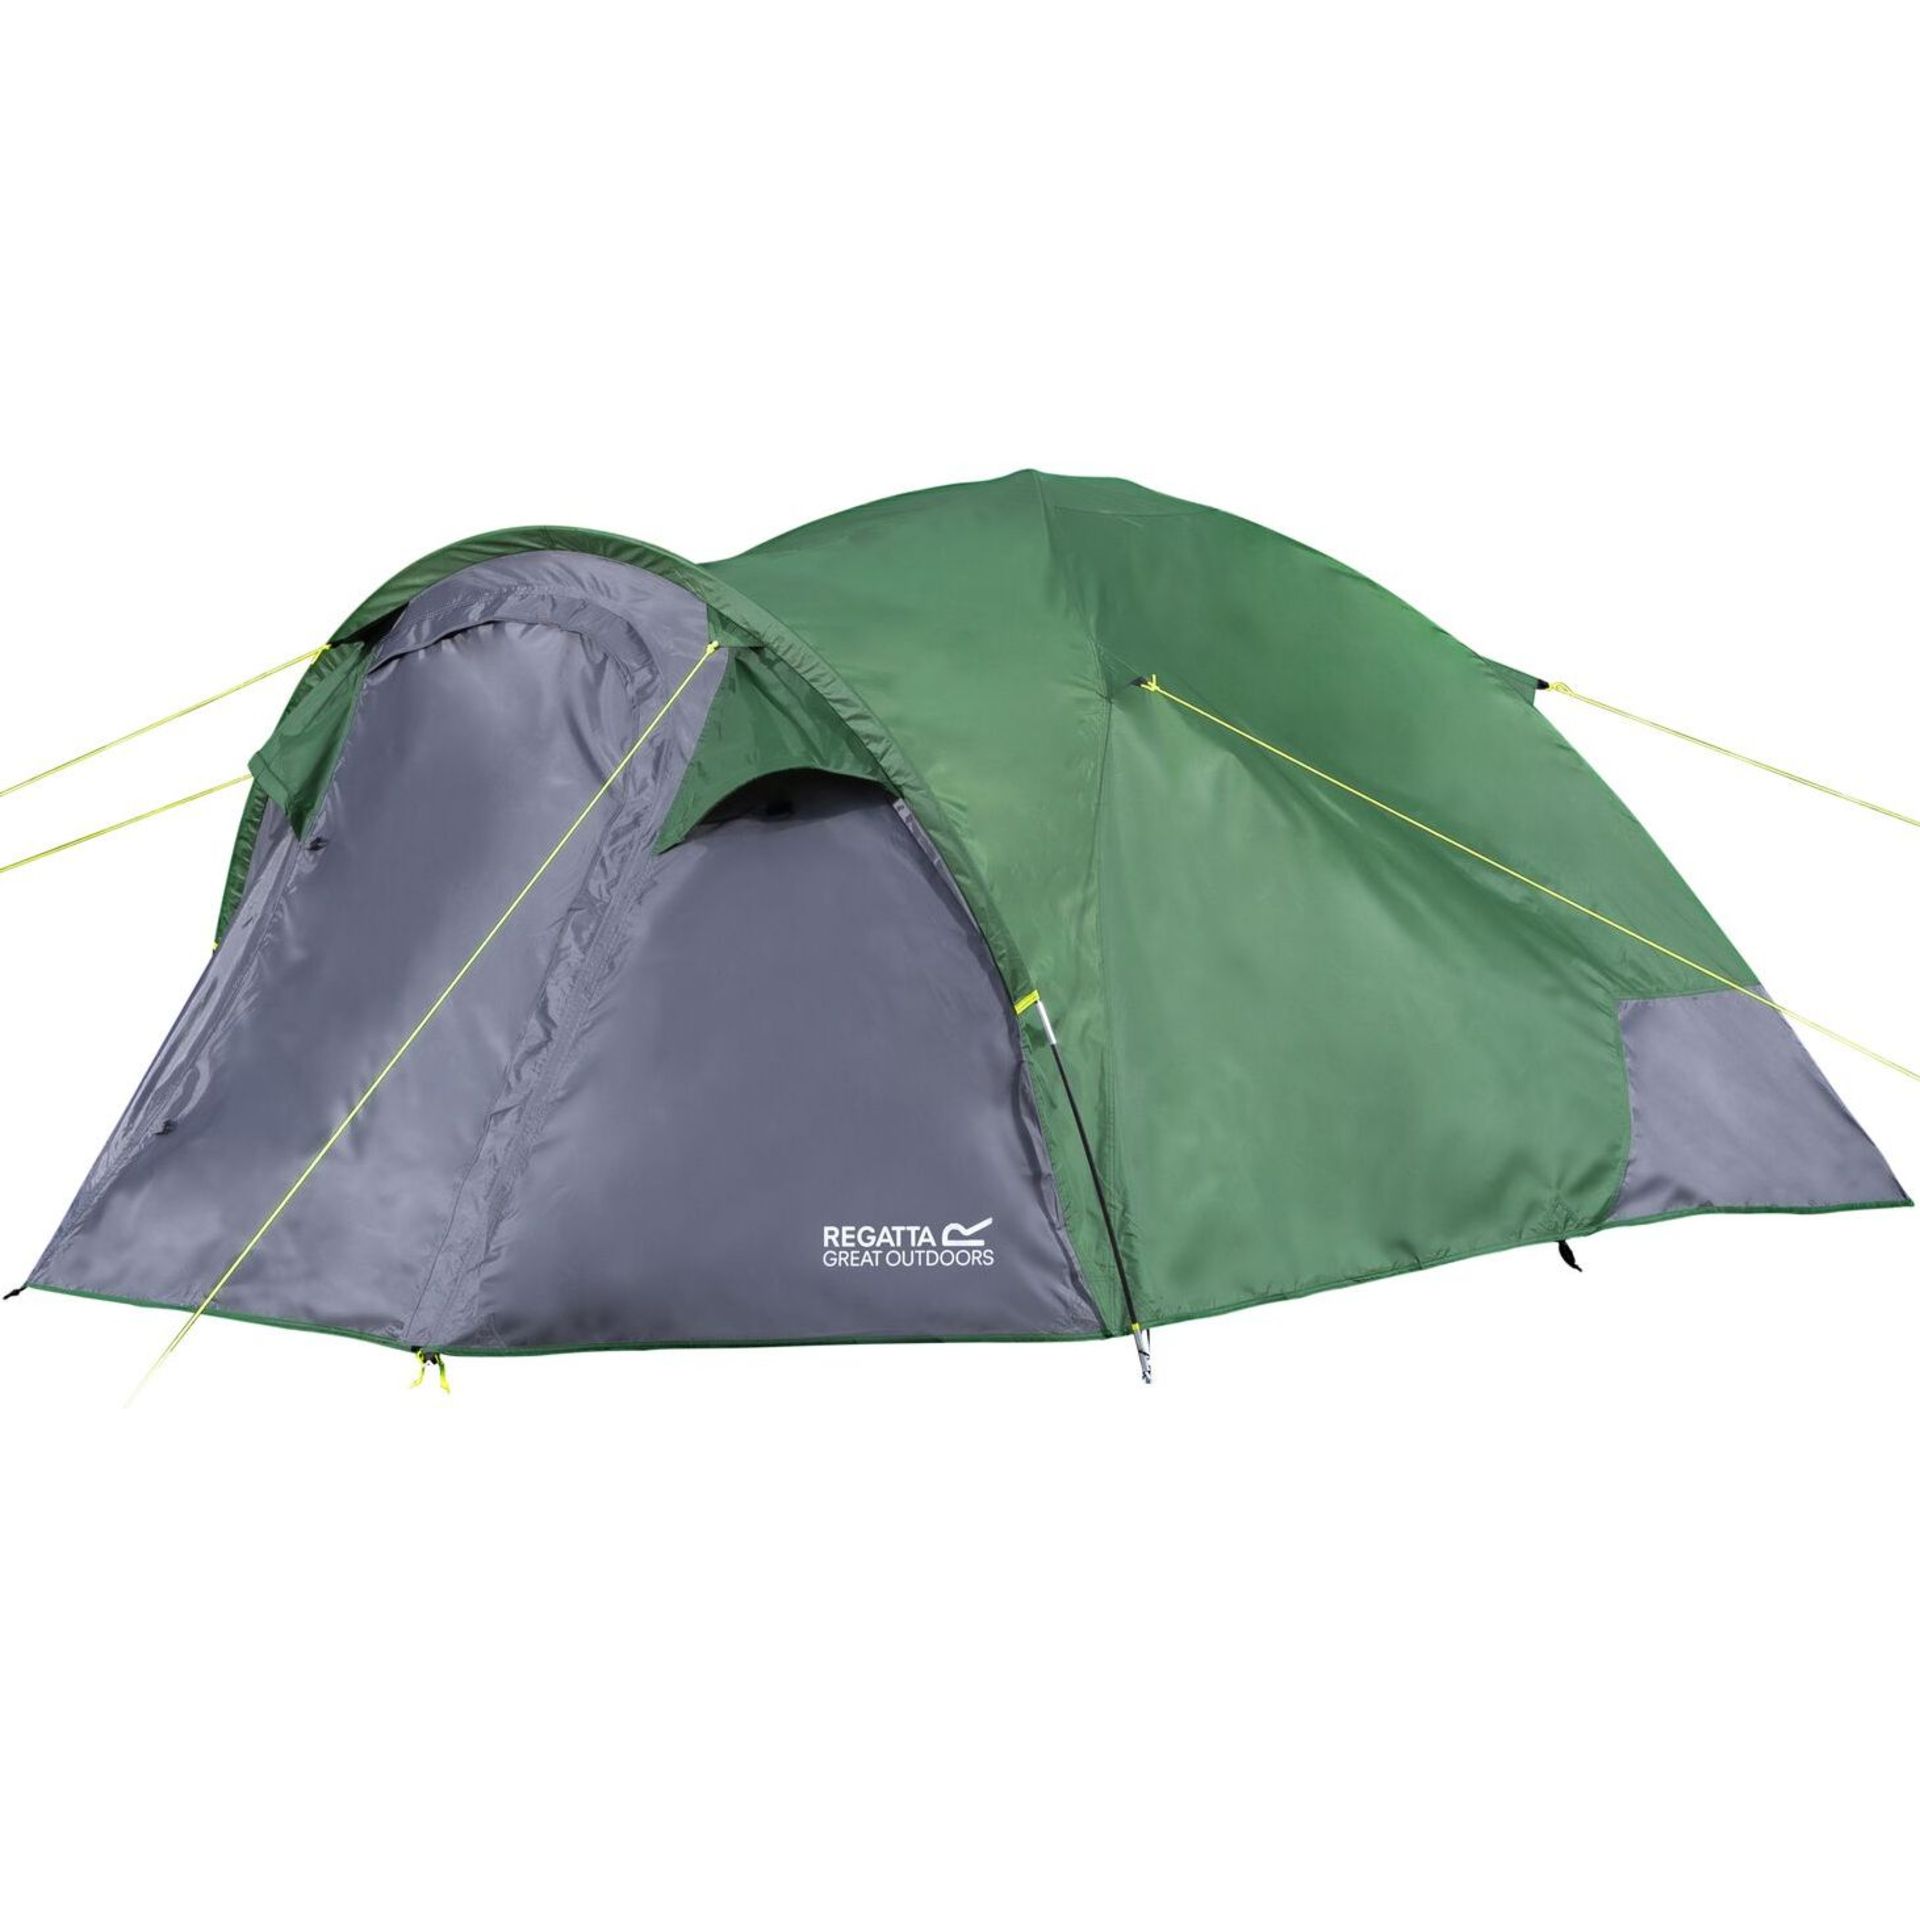 New & Boxed Regatta Kivu V3 4 Person Dome Tent. RRP £599 (ROW7-IB300). 100% Polyester. Height: - Image 4 of 6